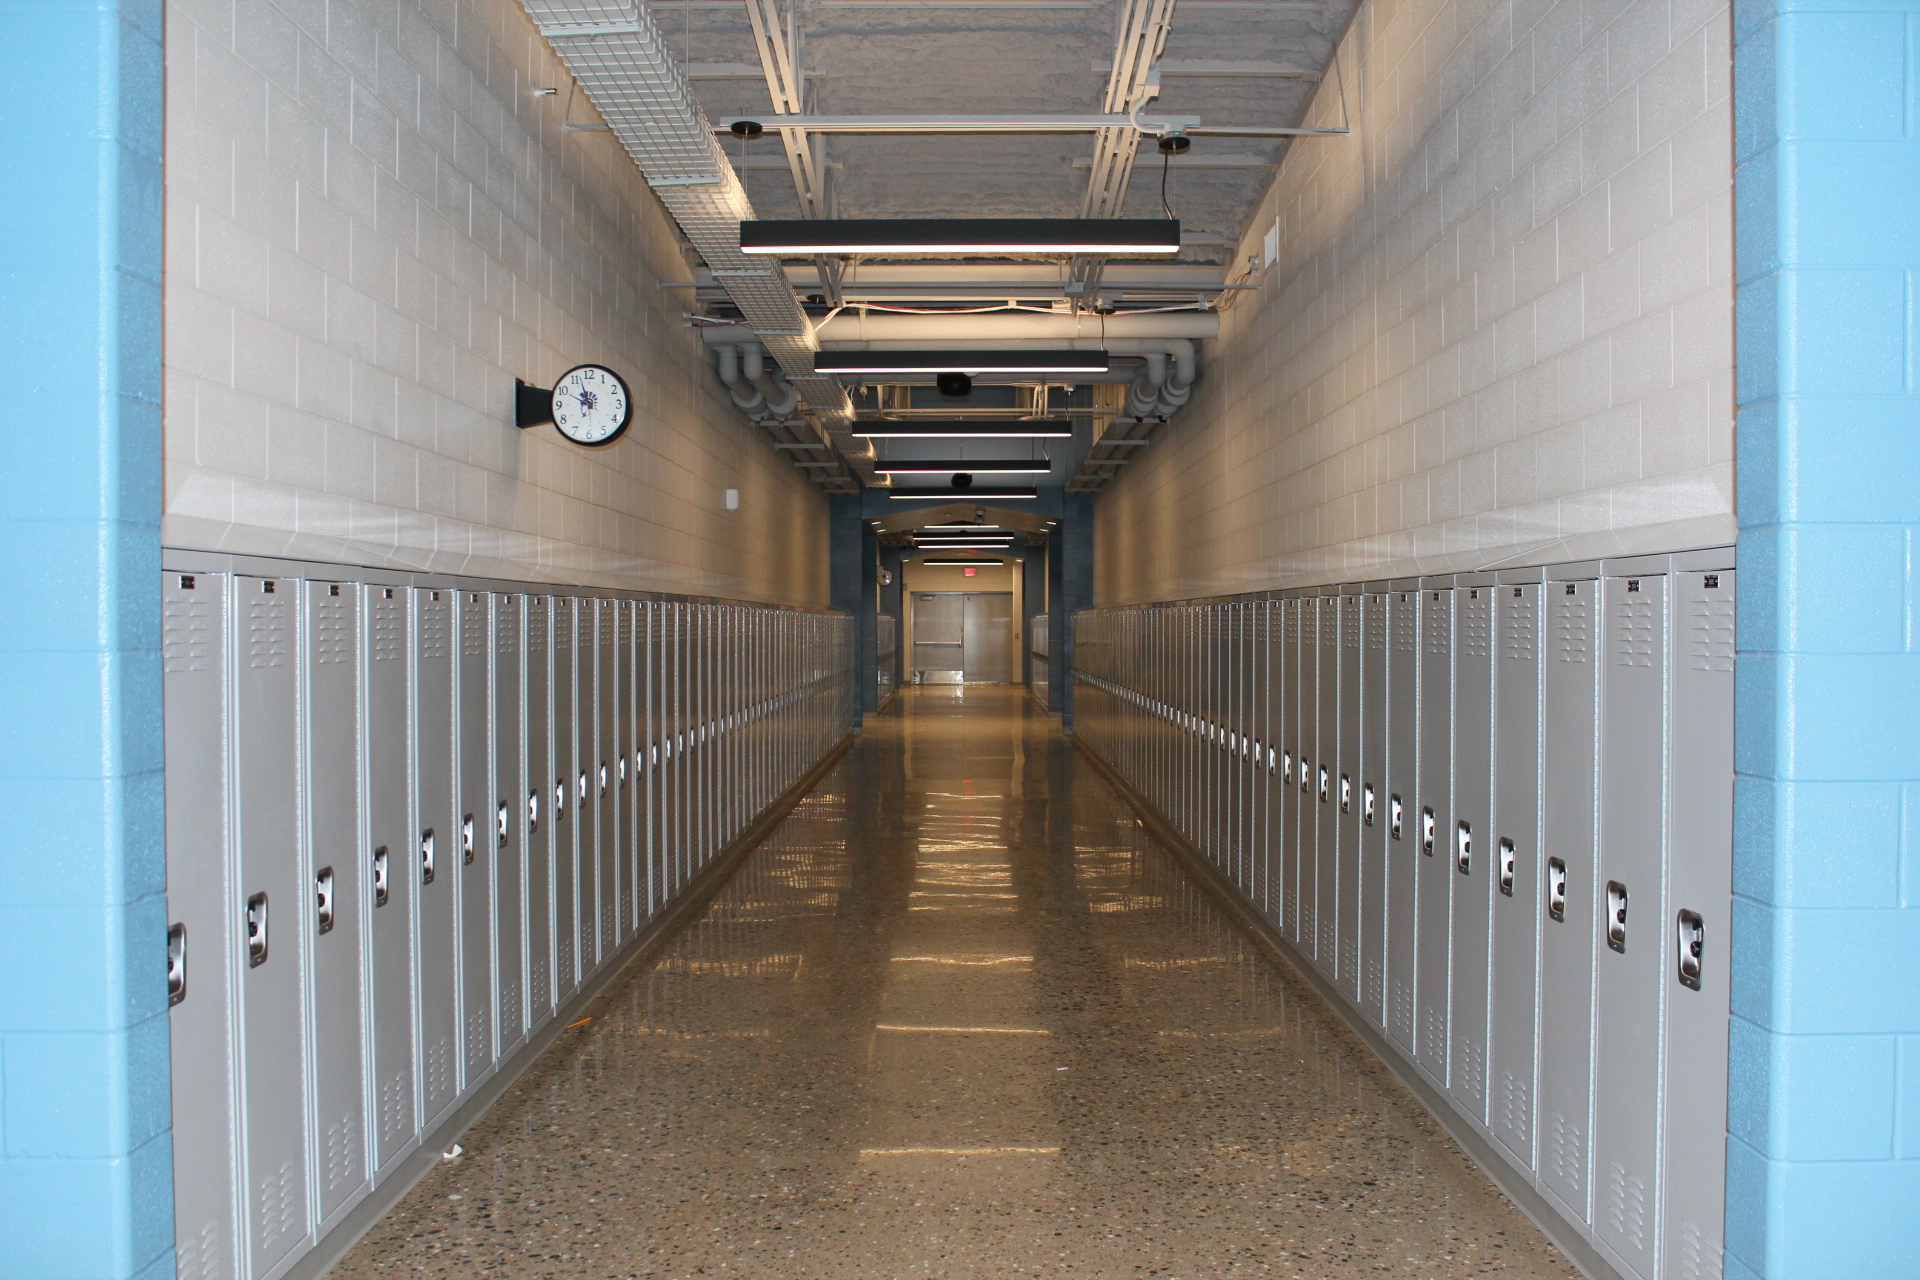 Picture of hallway at Plainwell Middle School